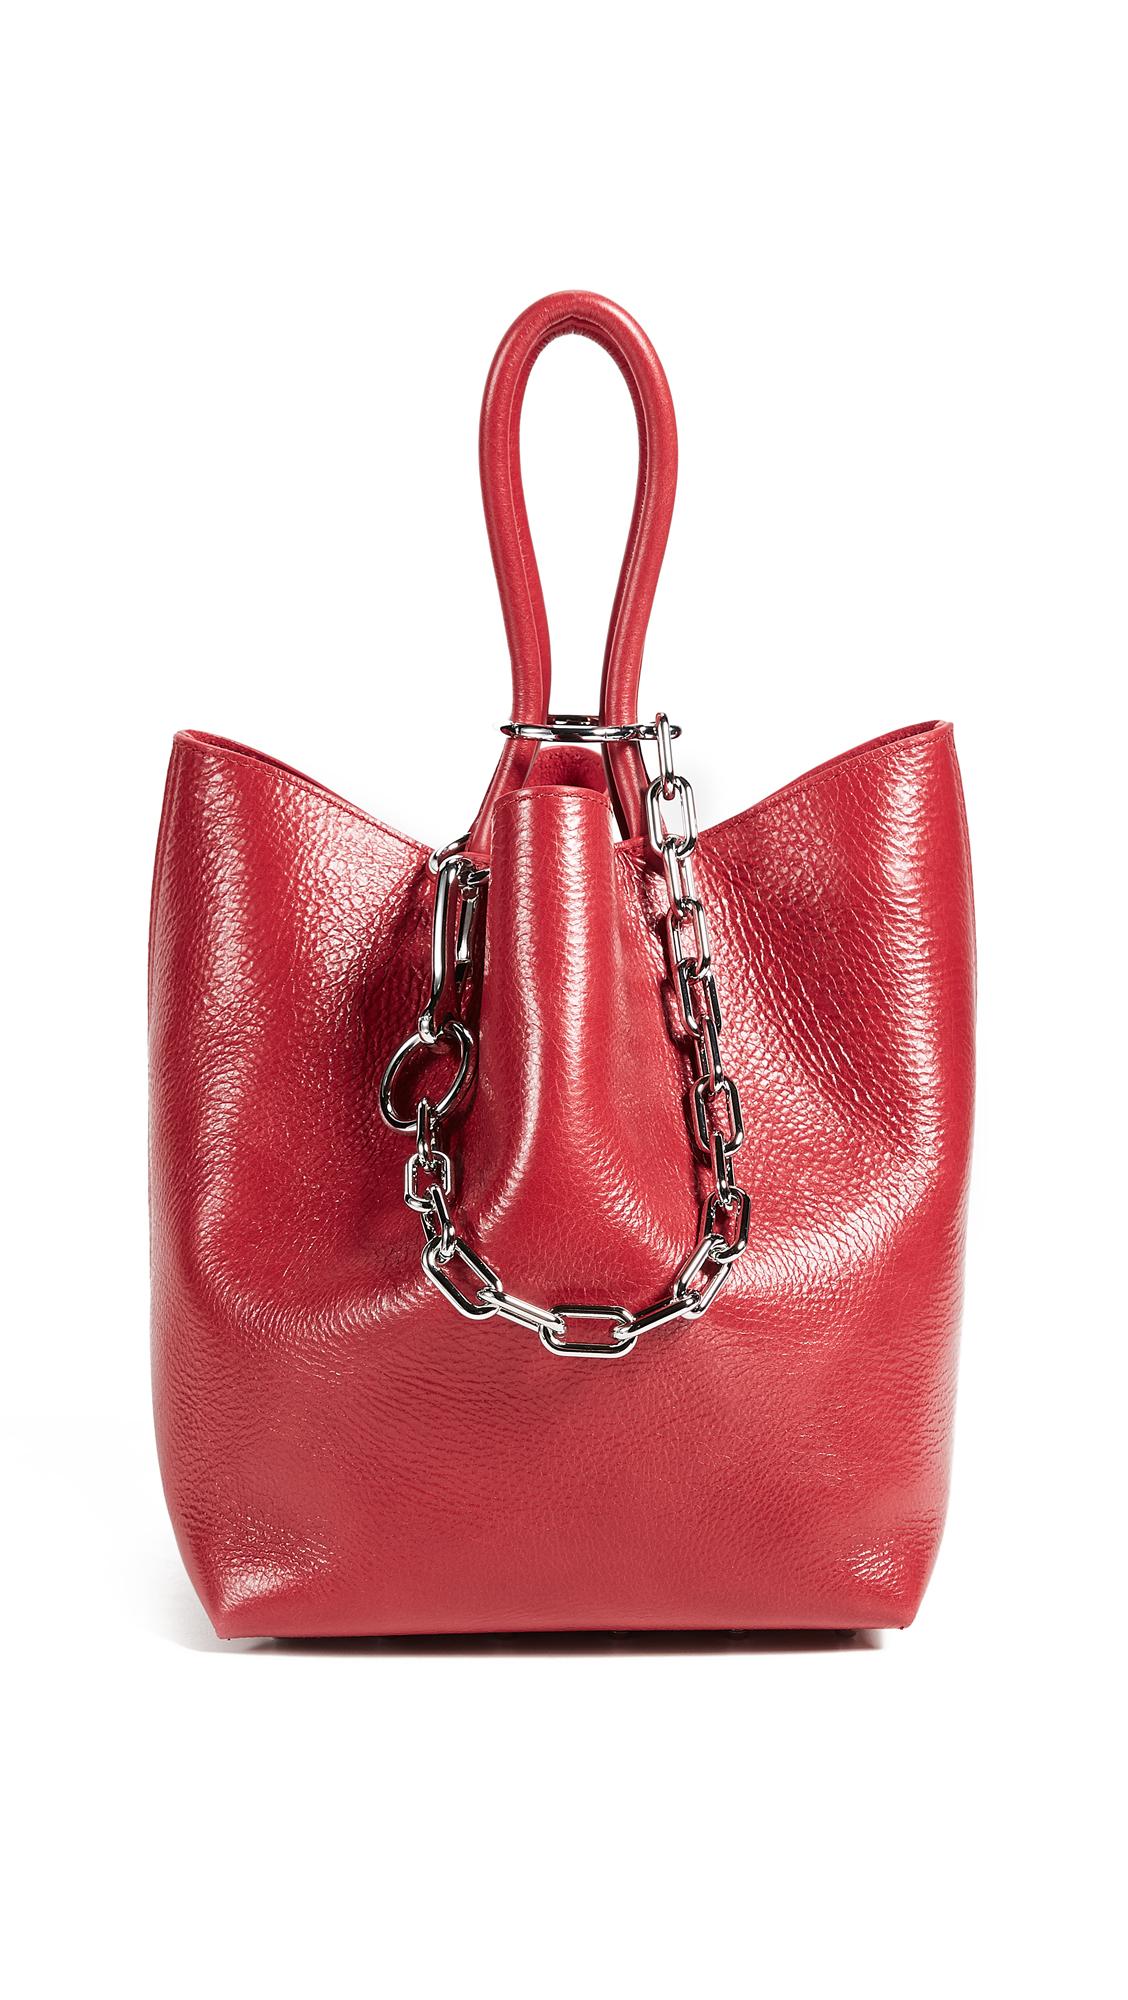 Alexander Wang Large Leather Roxy Tote Bag In Red | ModeSens